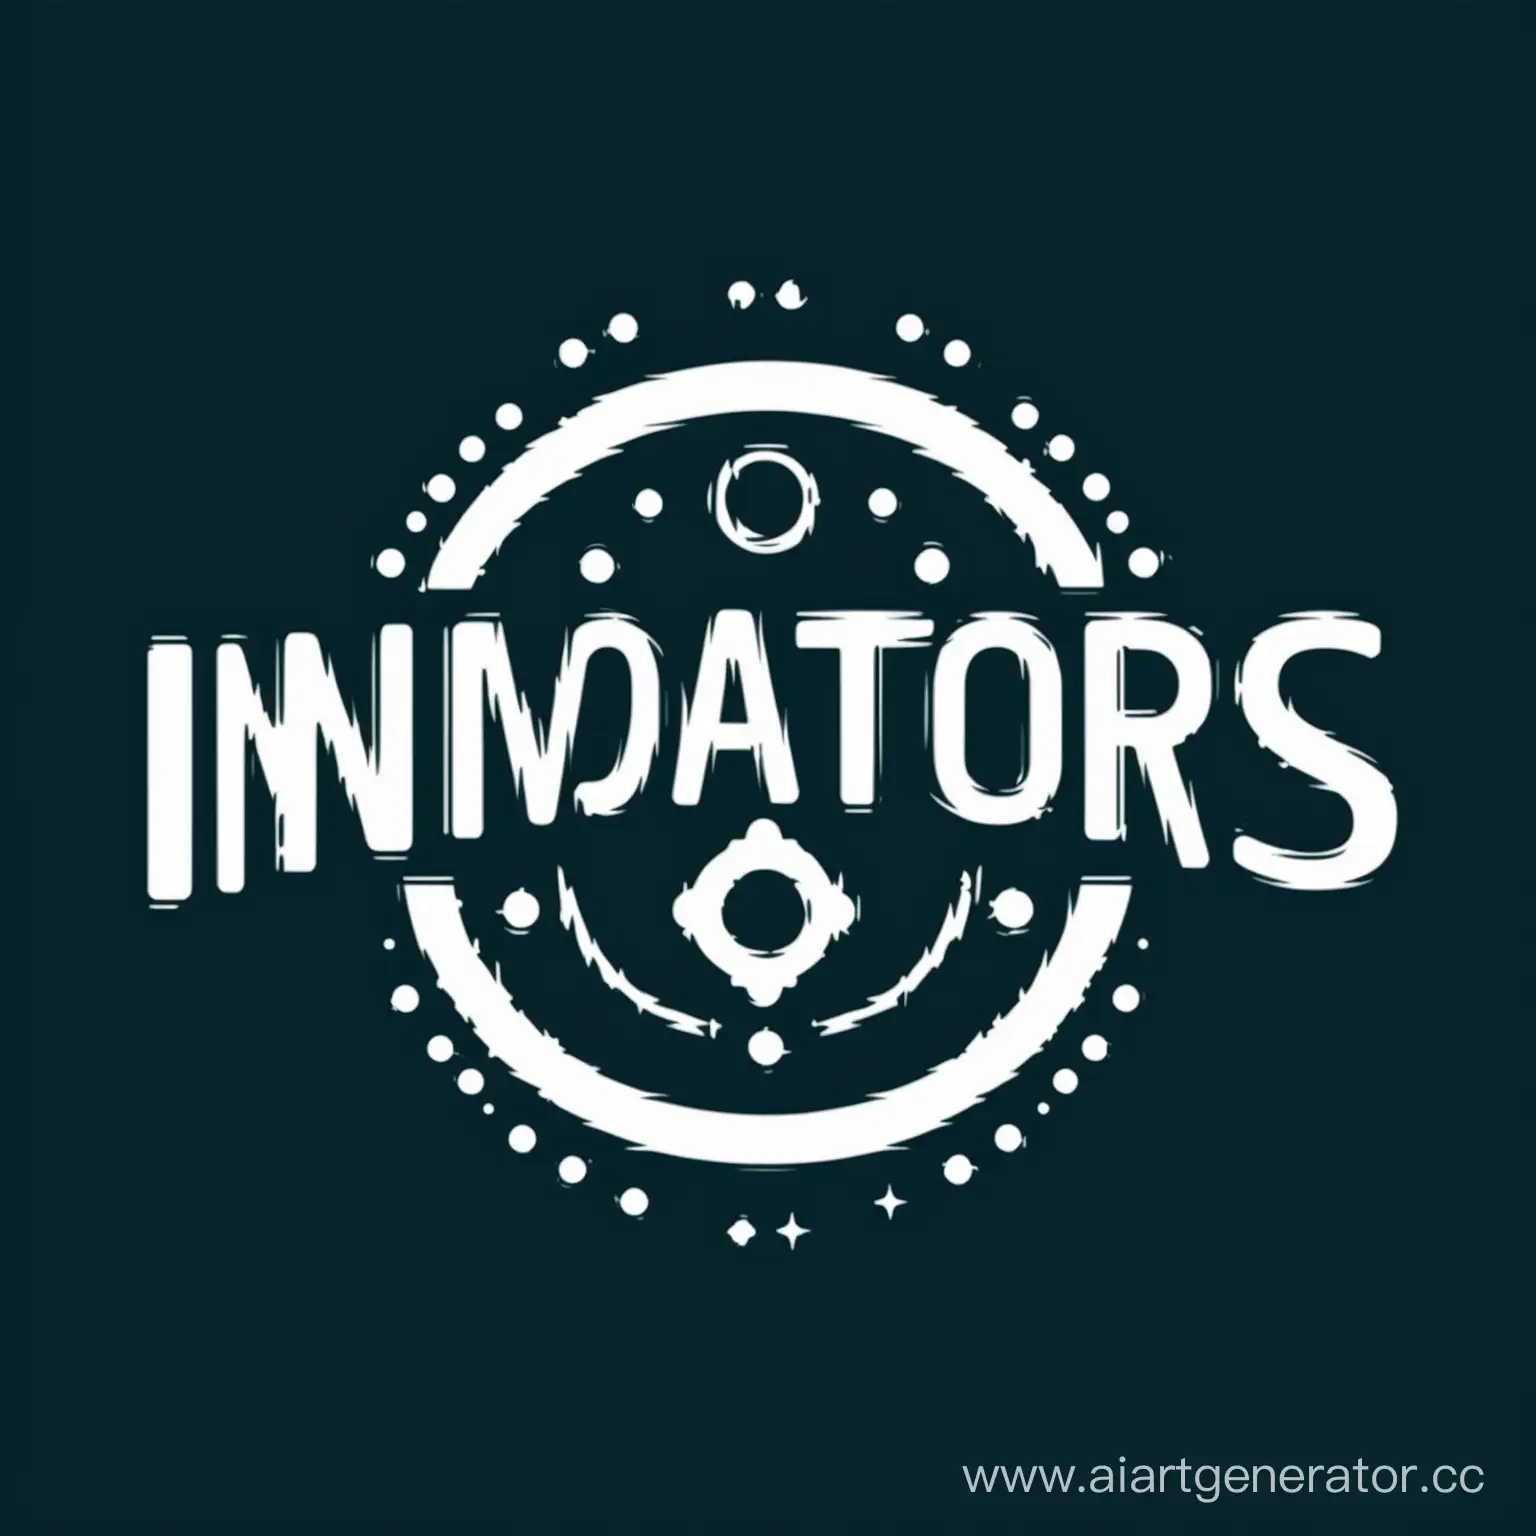 Creative-Logo-Designers-Working-on-Innovative-Concepts